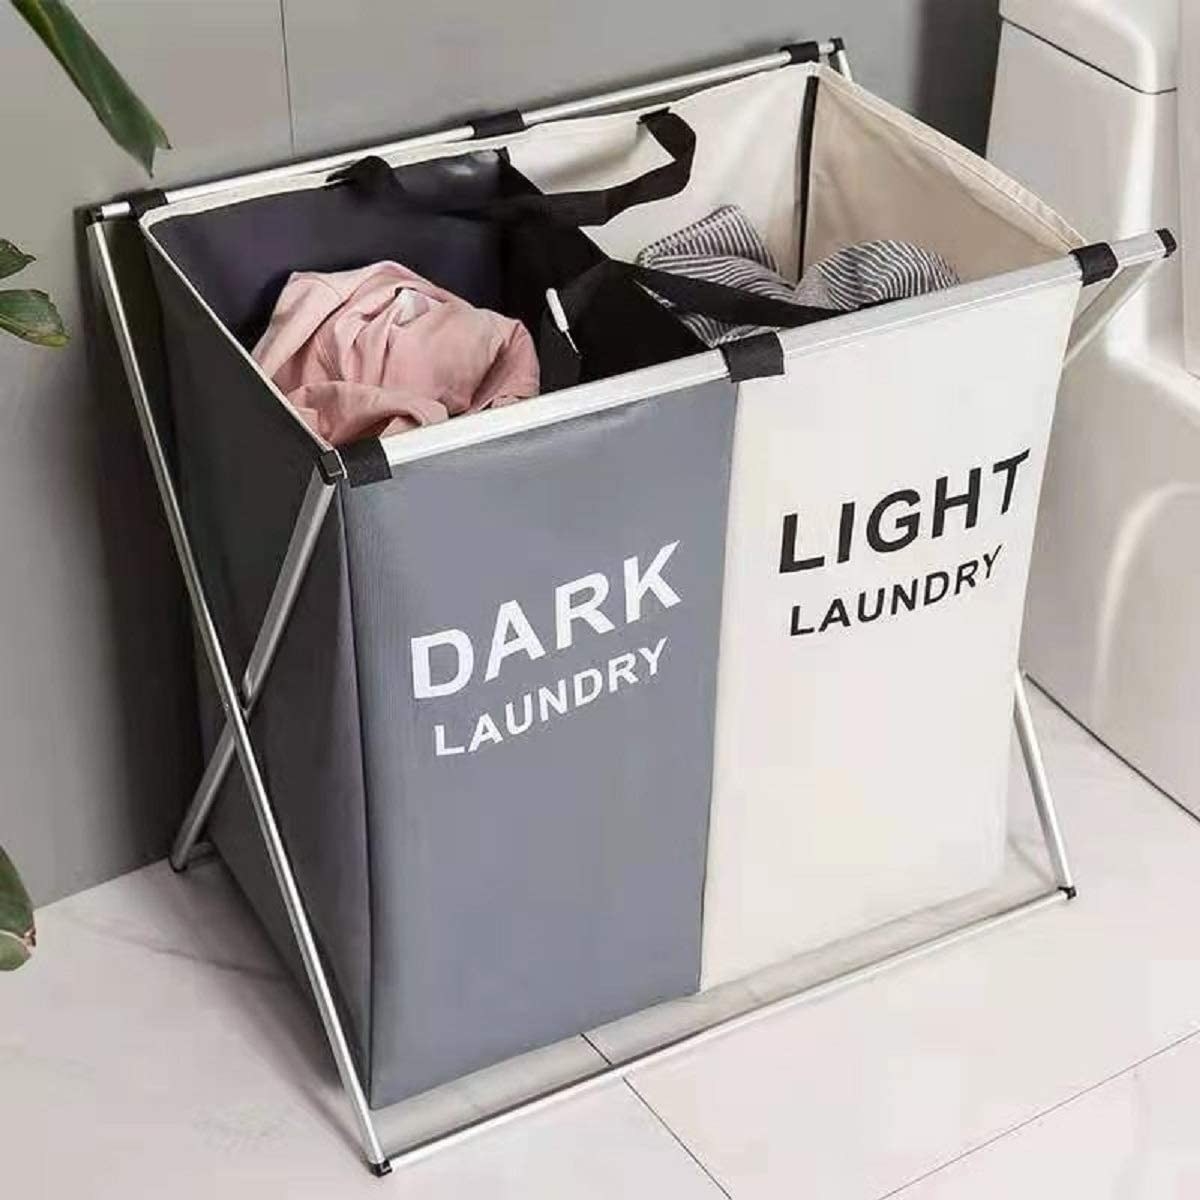 A large laundry hamper with two sections One side has dark written on it and the other has light laundry written on it